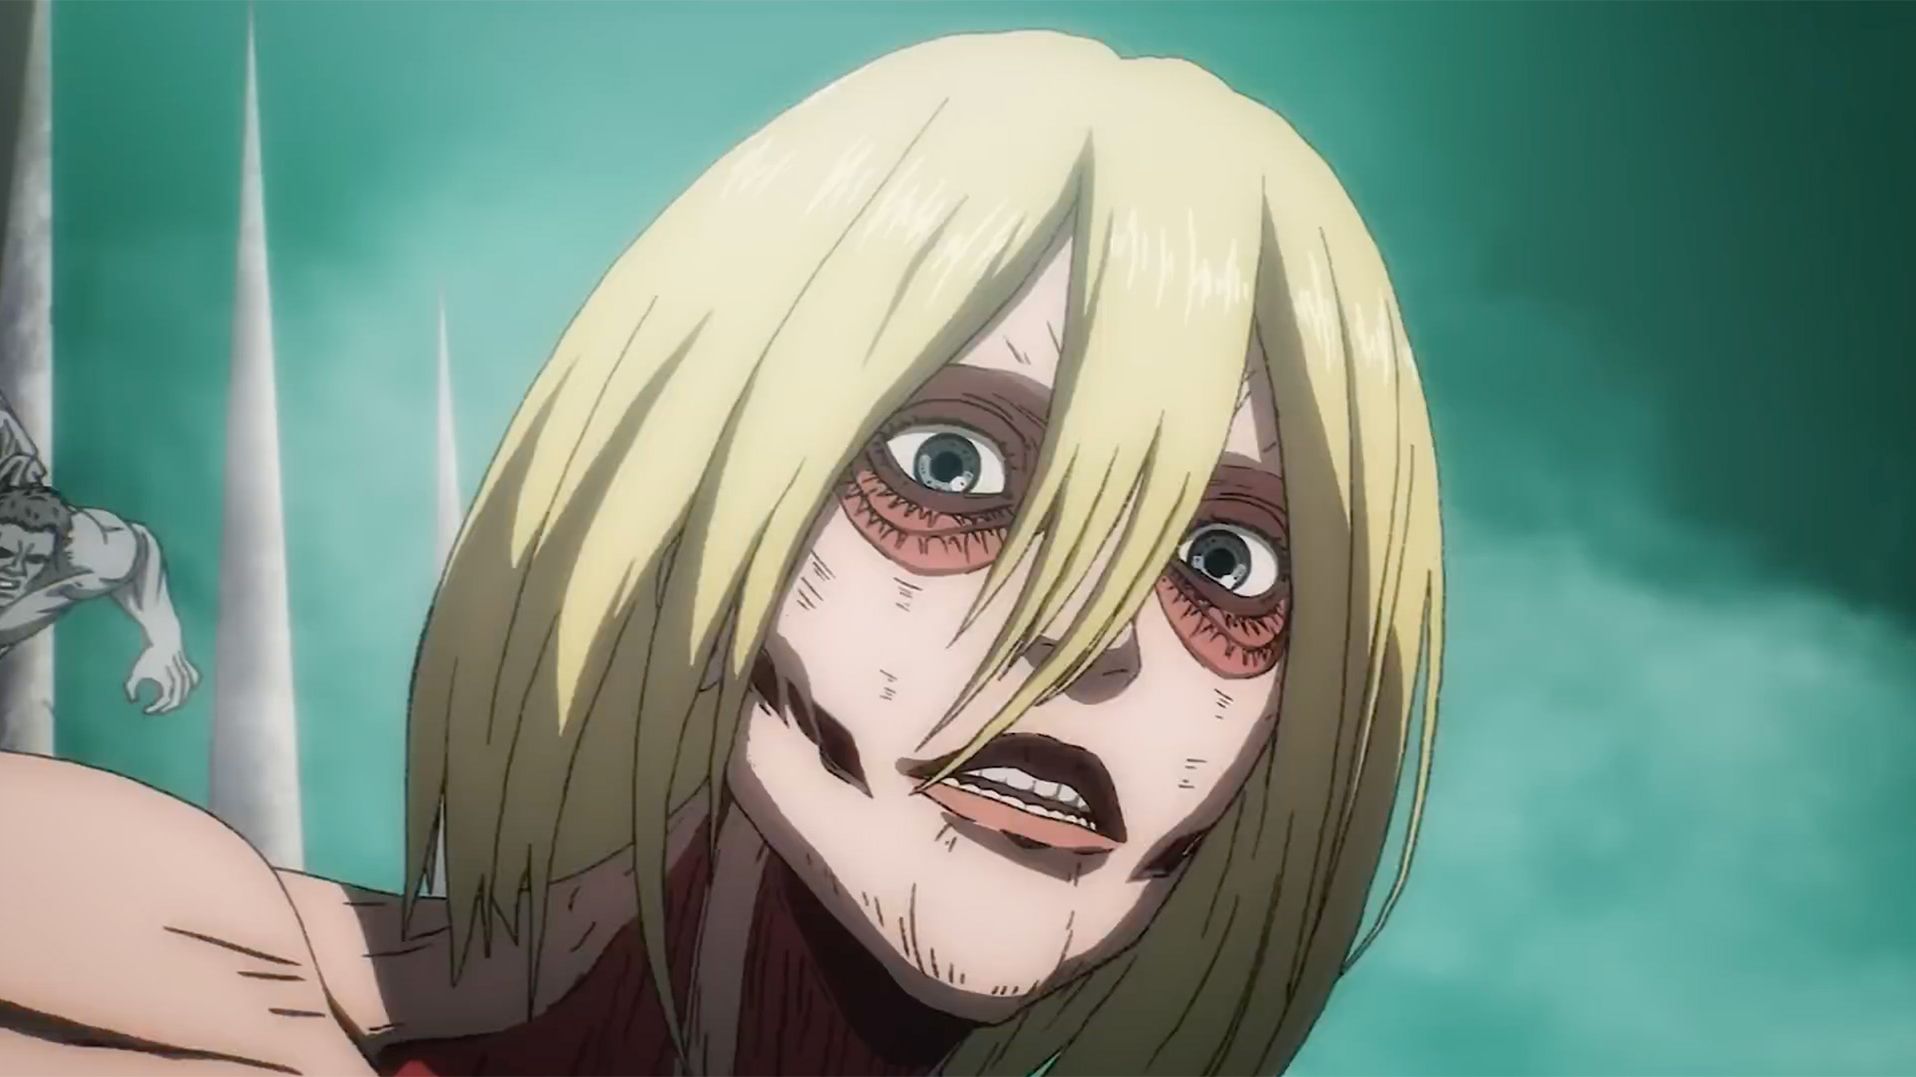 Attack on Titan Season 4 recap: What fans need to know ahead of Part 3